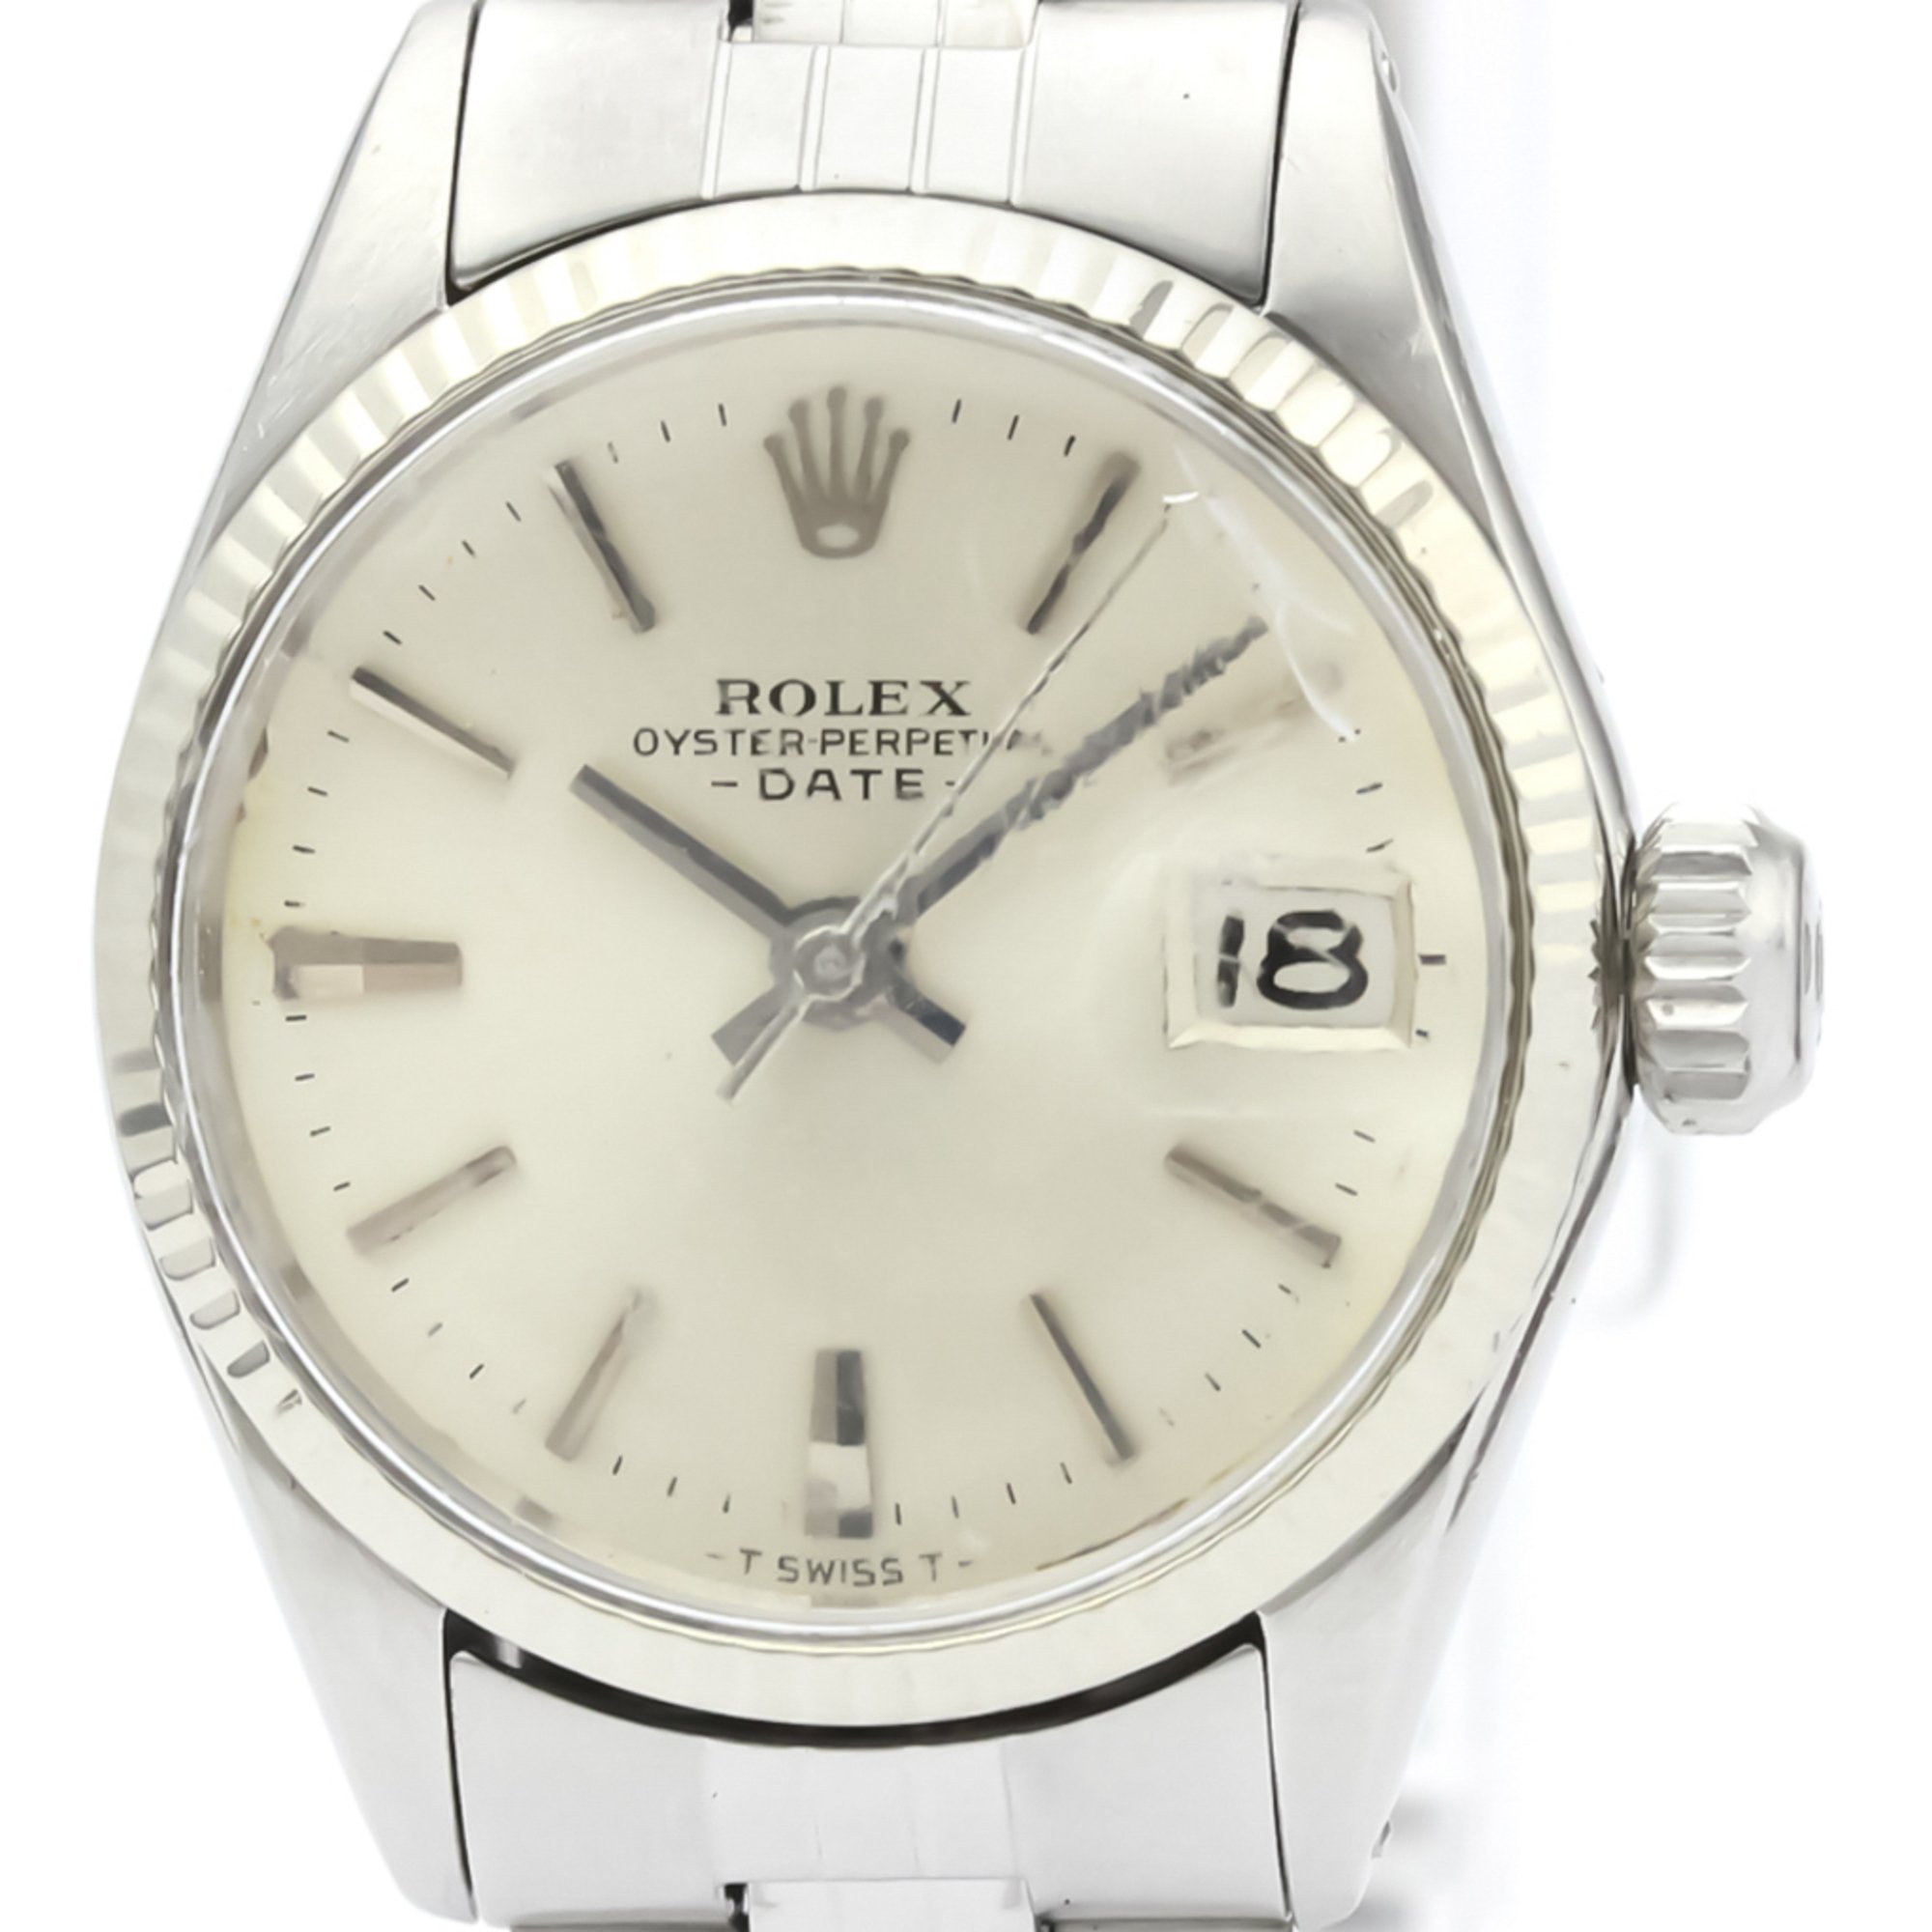 Vintage ROLEX Oyster Perpetual Date 6517 White Gold Steel Ladies Watch BF510684